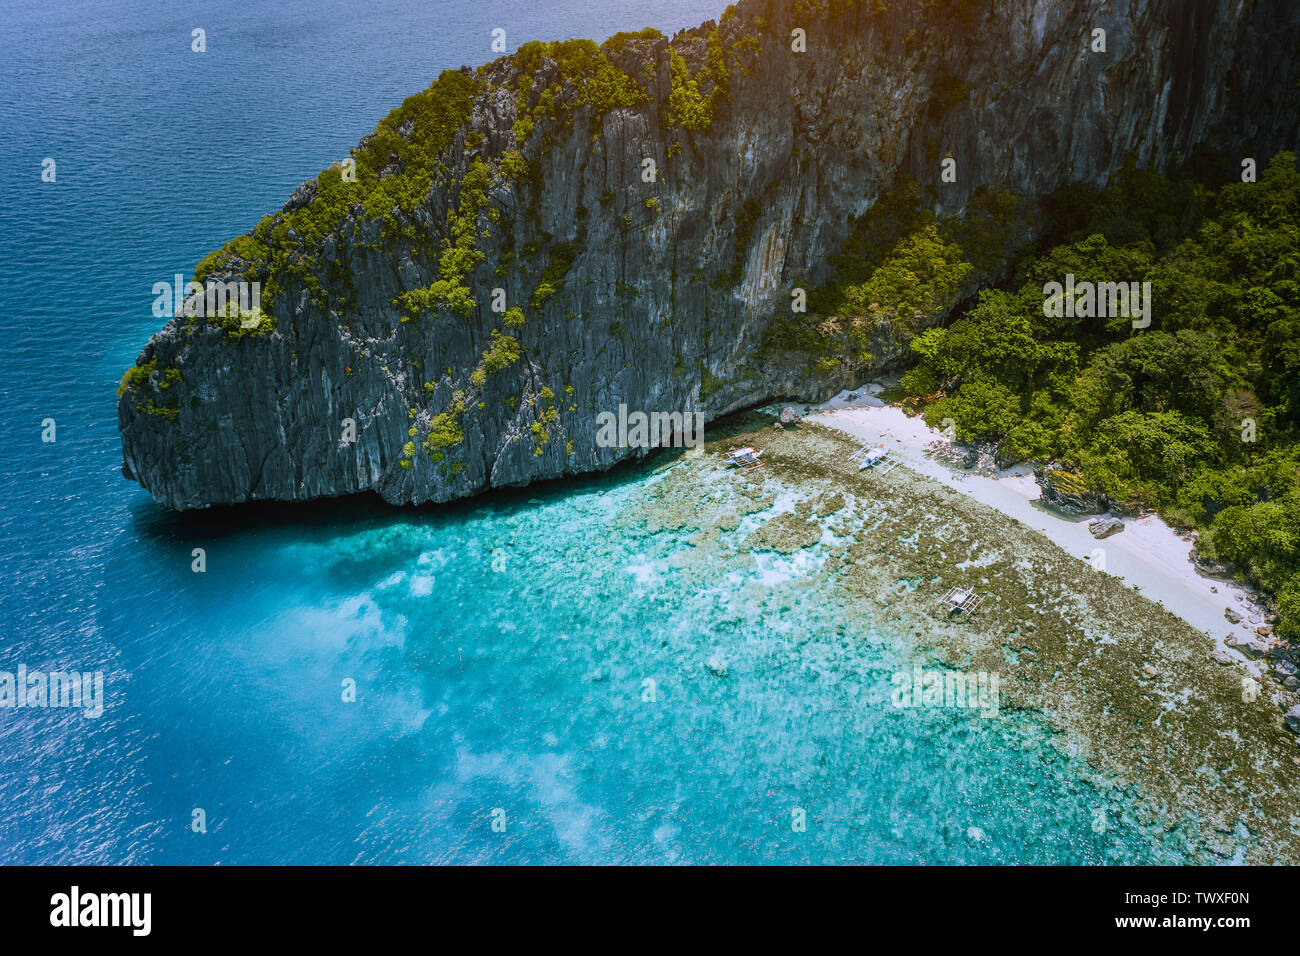 Aerial drone view of tropical beach with banca boats on Entalula Island. Karst limestone rocky mountains surrouns blue bay with beautiful coral reef Stock Photo